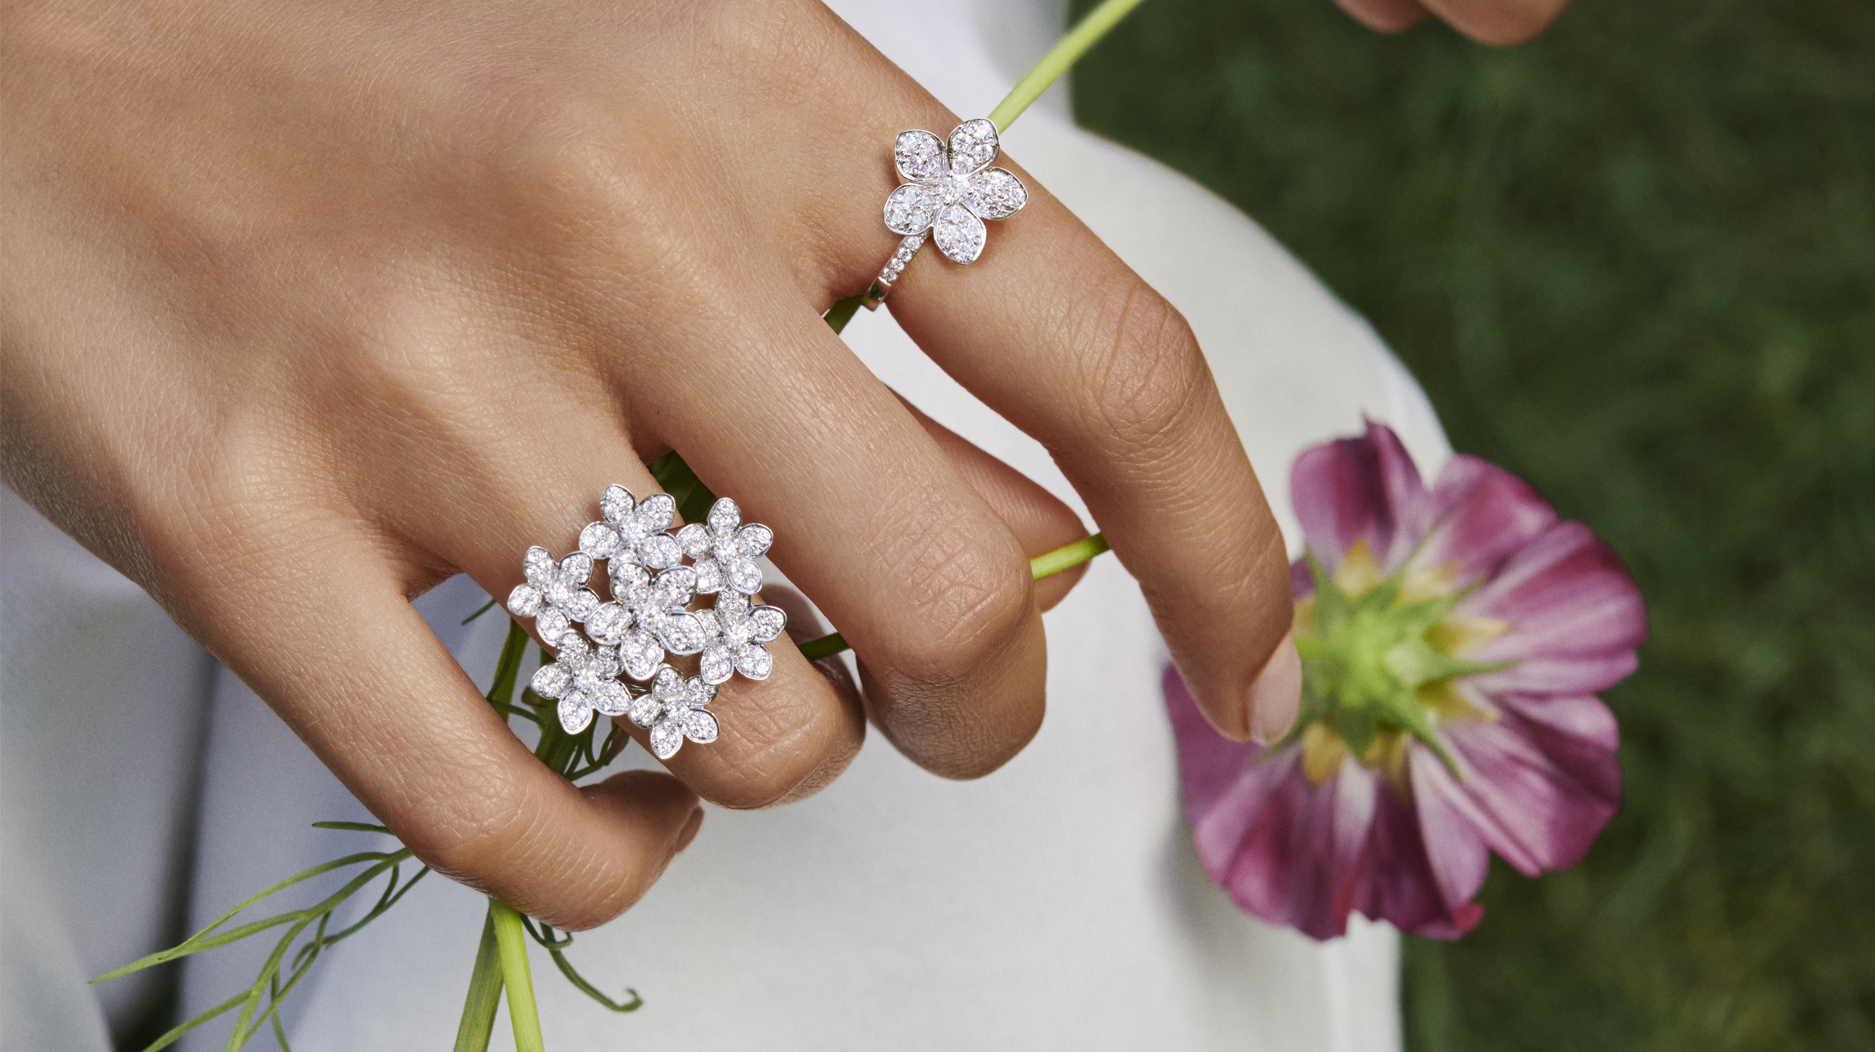 Graff's New Collection Is a Diamond Ode to Springtime